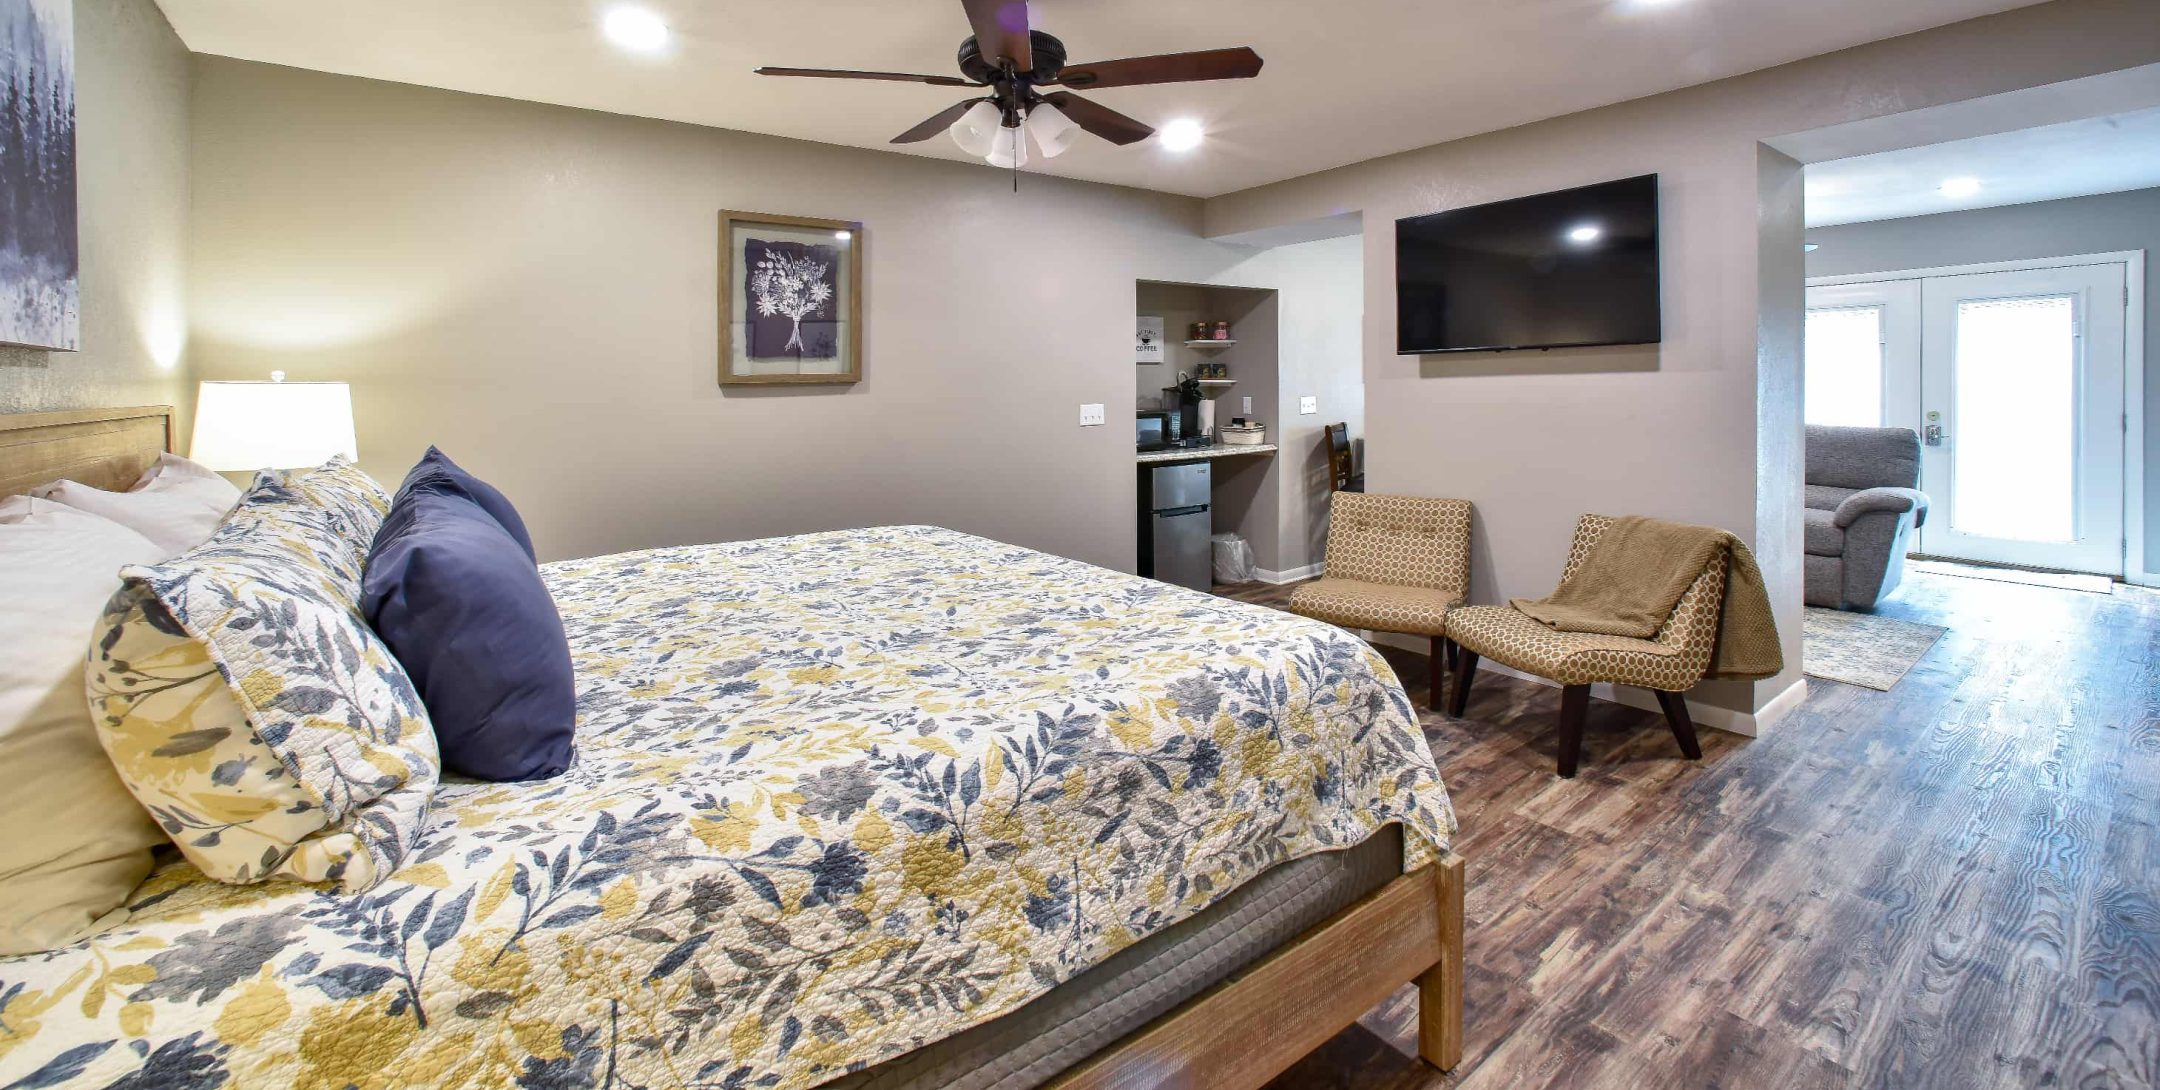 Big Sky Suite bedroom offering one of the best places to stay in Kansas